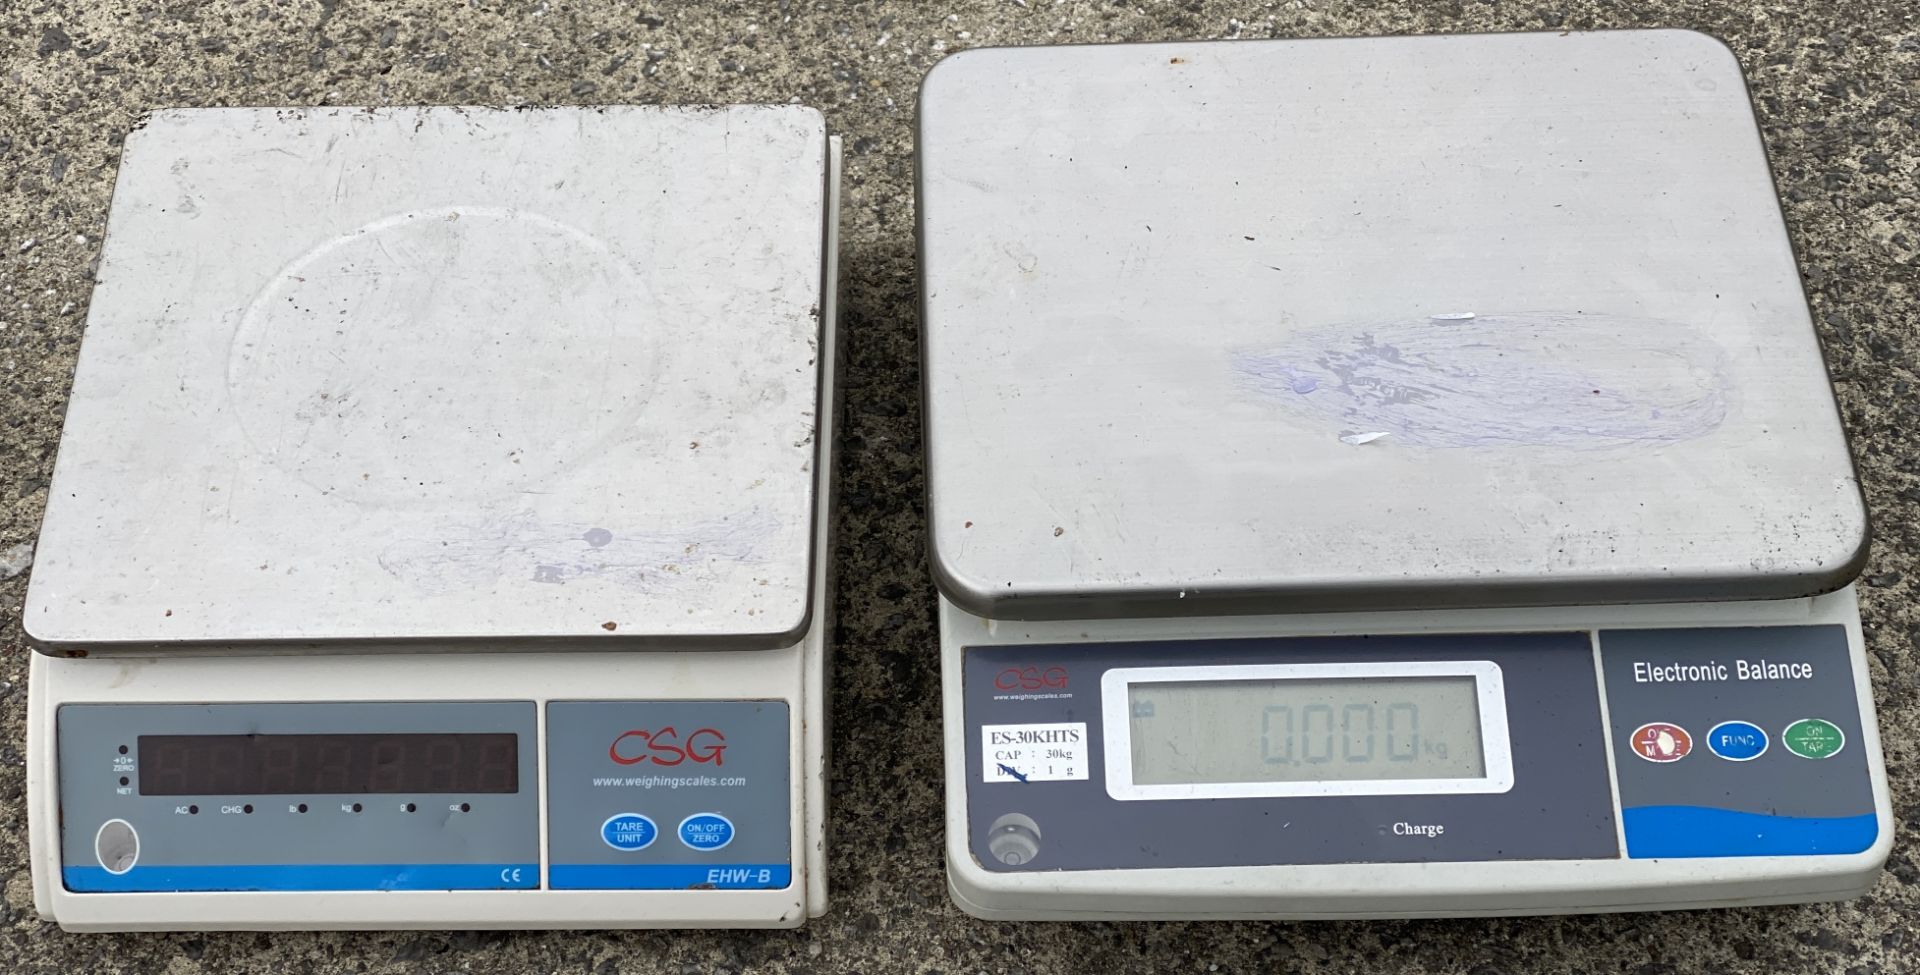 A CDG ES-30KHTS weighing scale and a CSG EHW-B weighing scale (Saleroom location: C3)